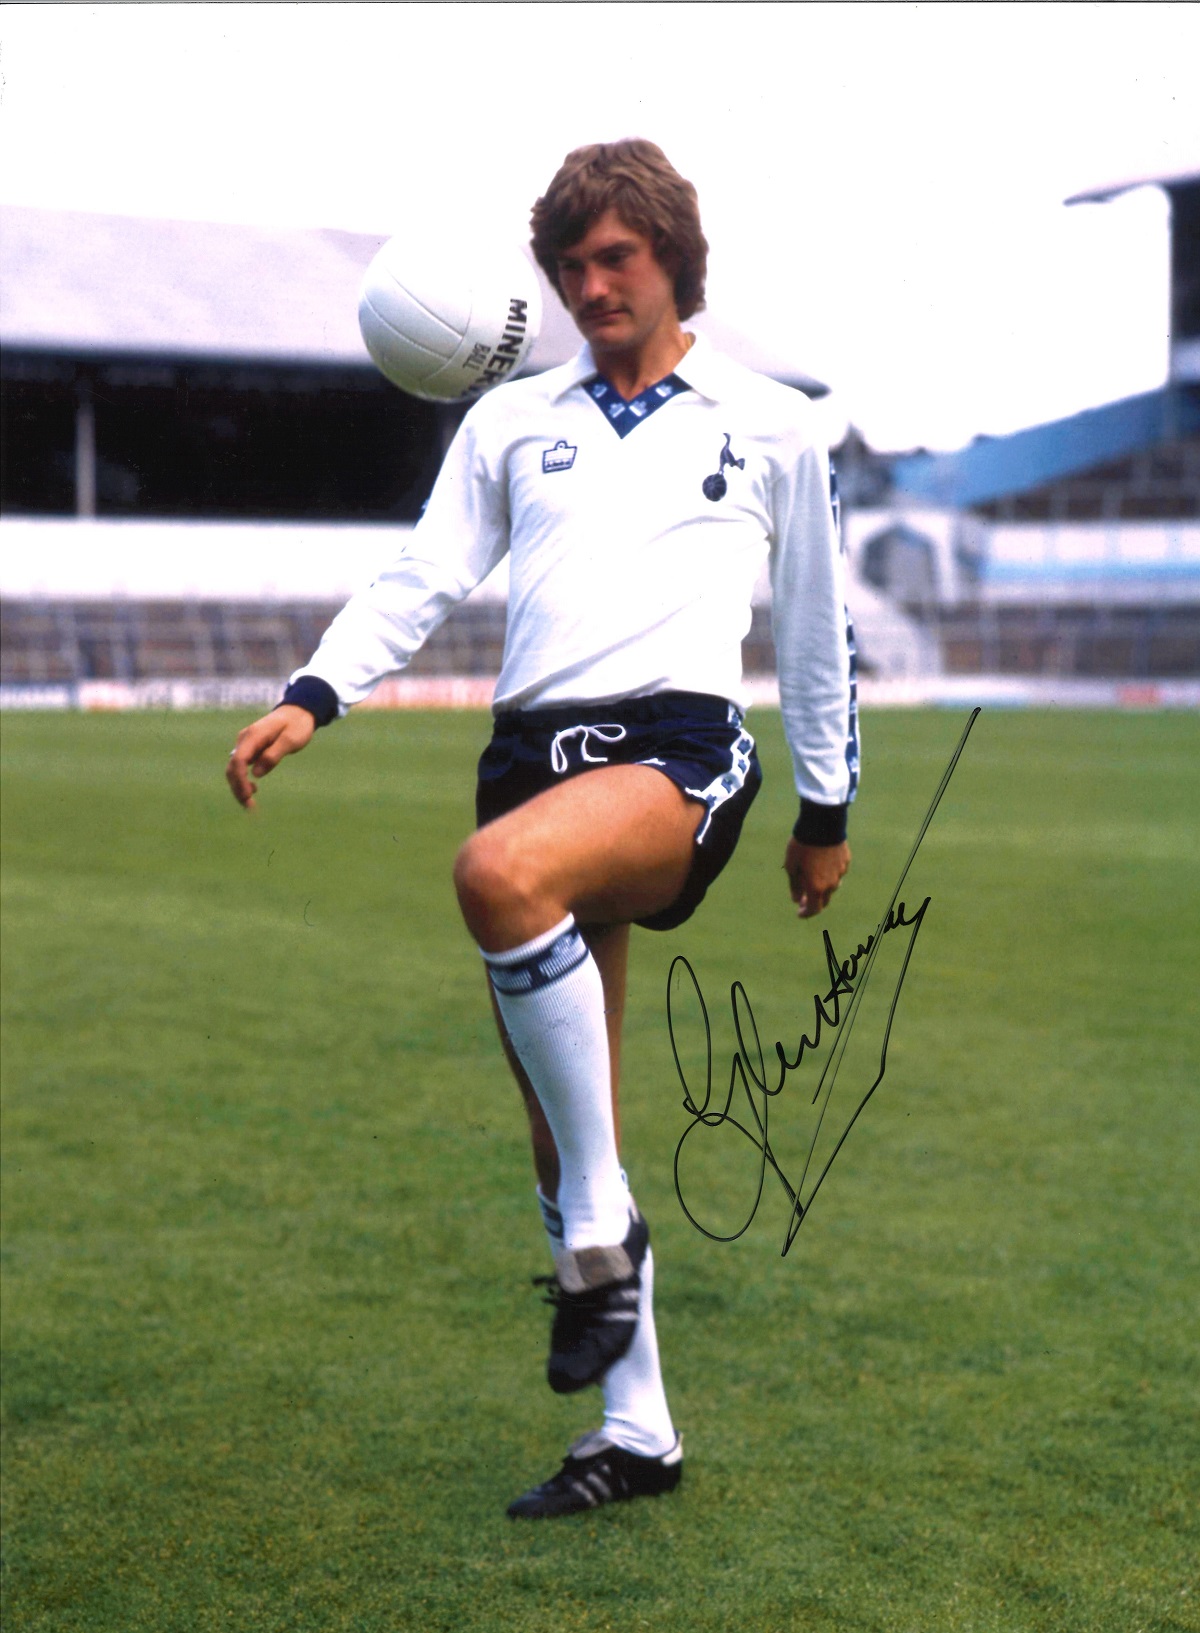 Glen Hoddle Tottenham Signed 16 x 12 inch football colour photo. This item is from the stock of